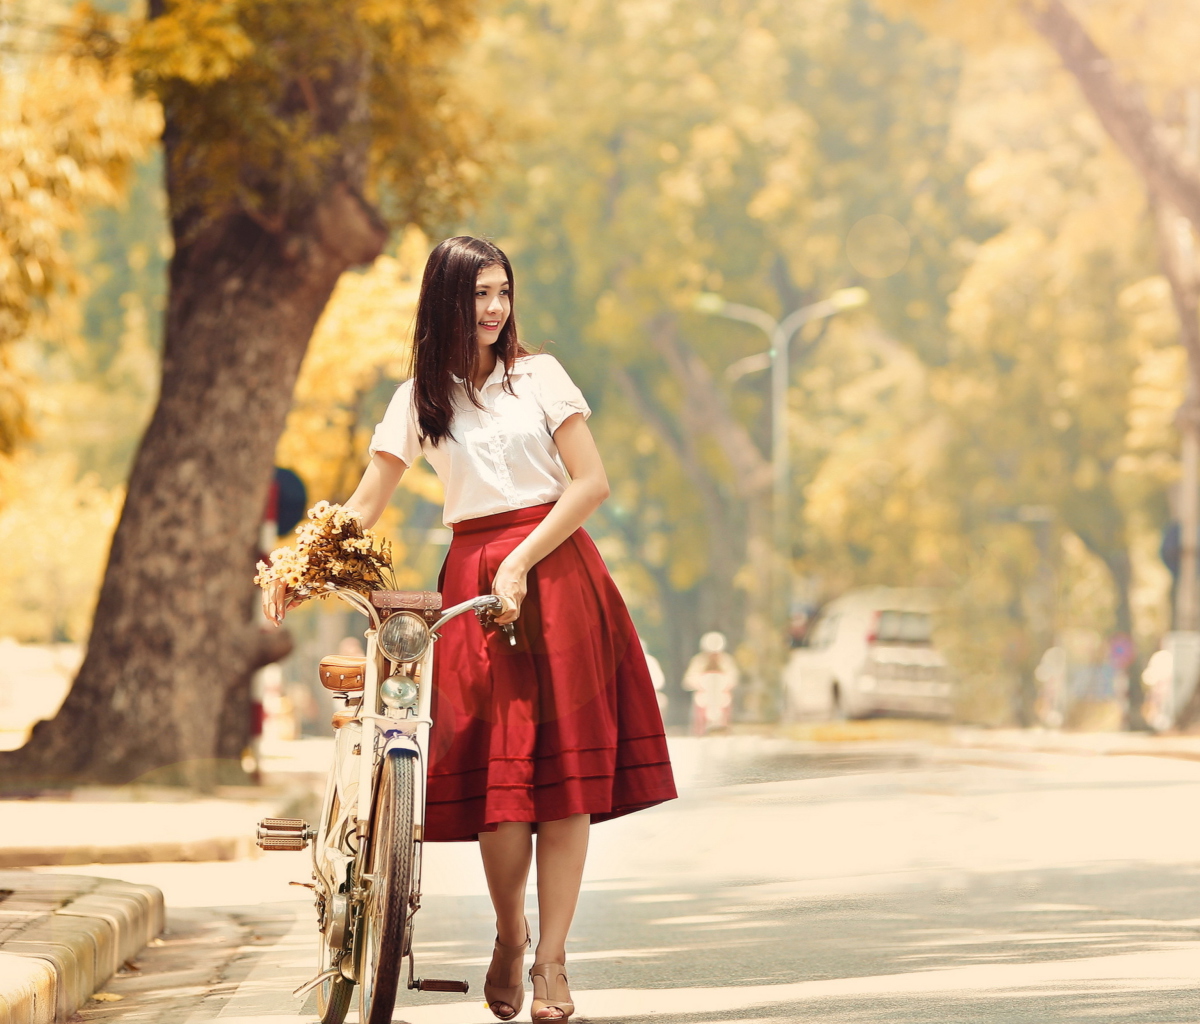 Romantic Girl With Bicycle And Flowers screenshot #1 1200x1024